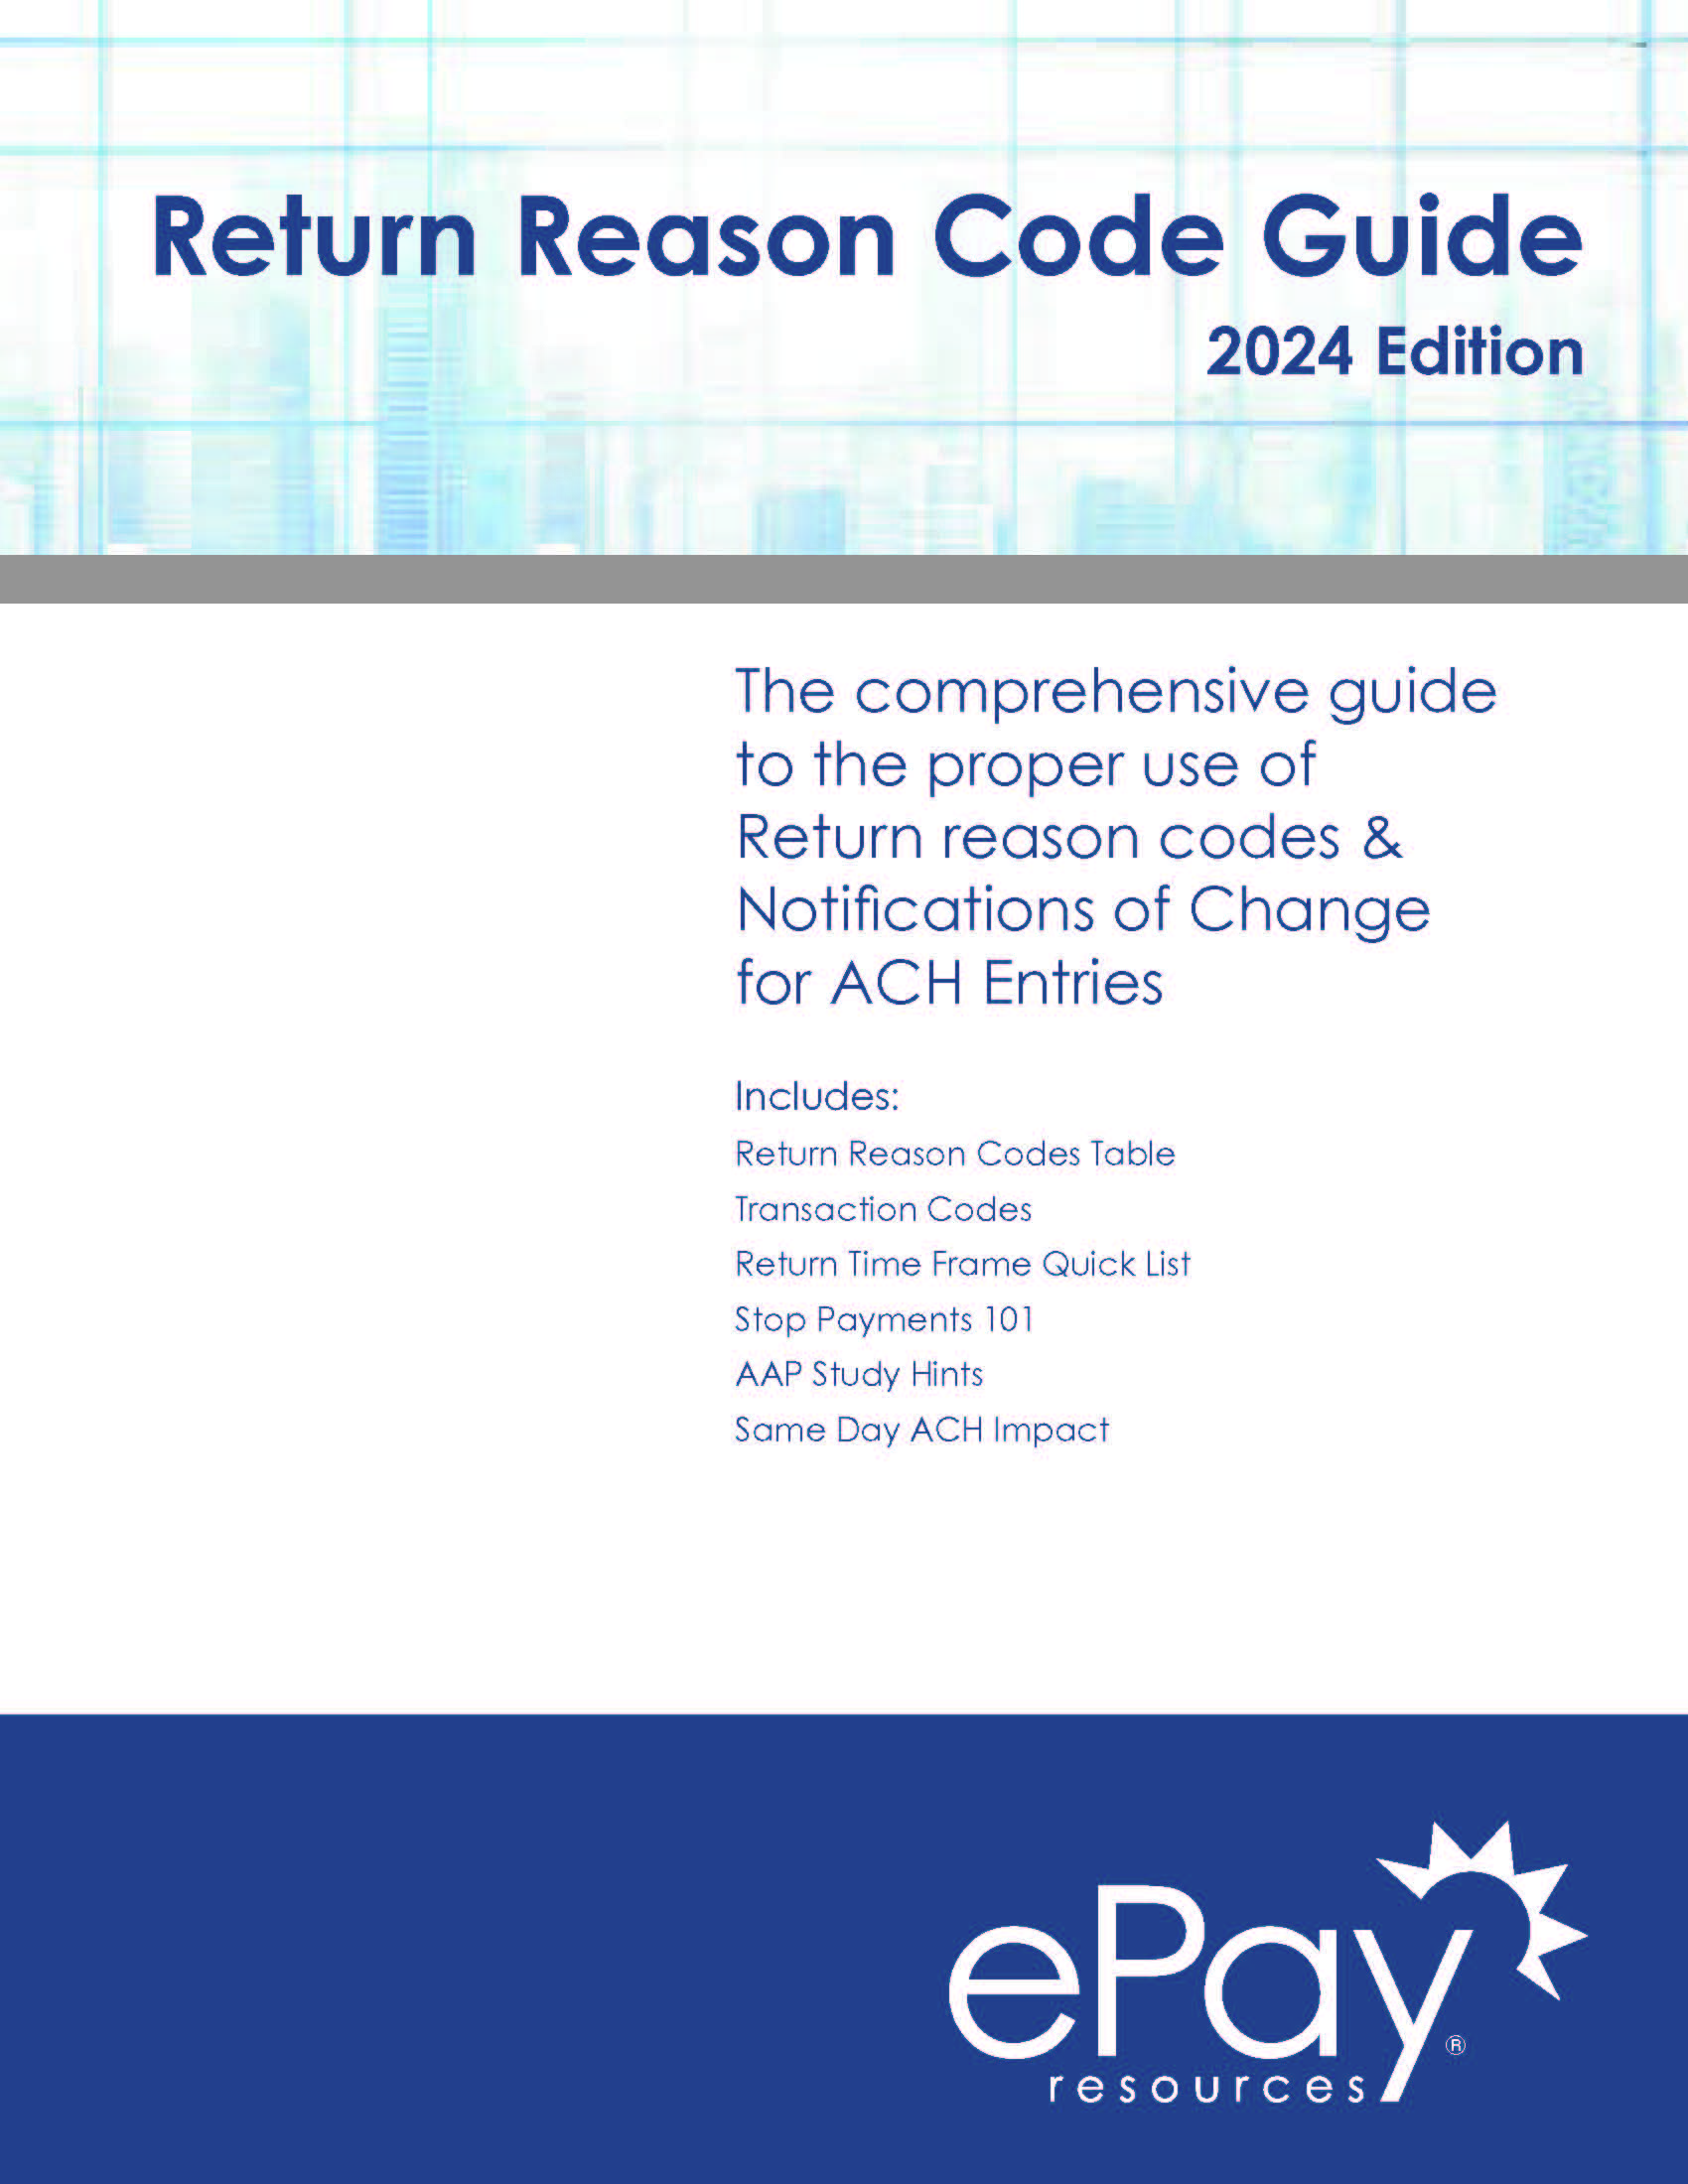 Return Reason Code Guide & NOC Booklet (Electronic)